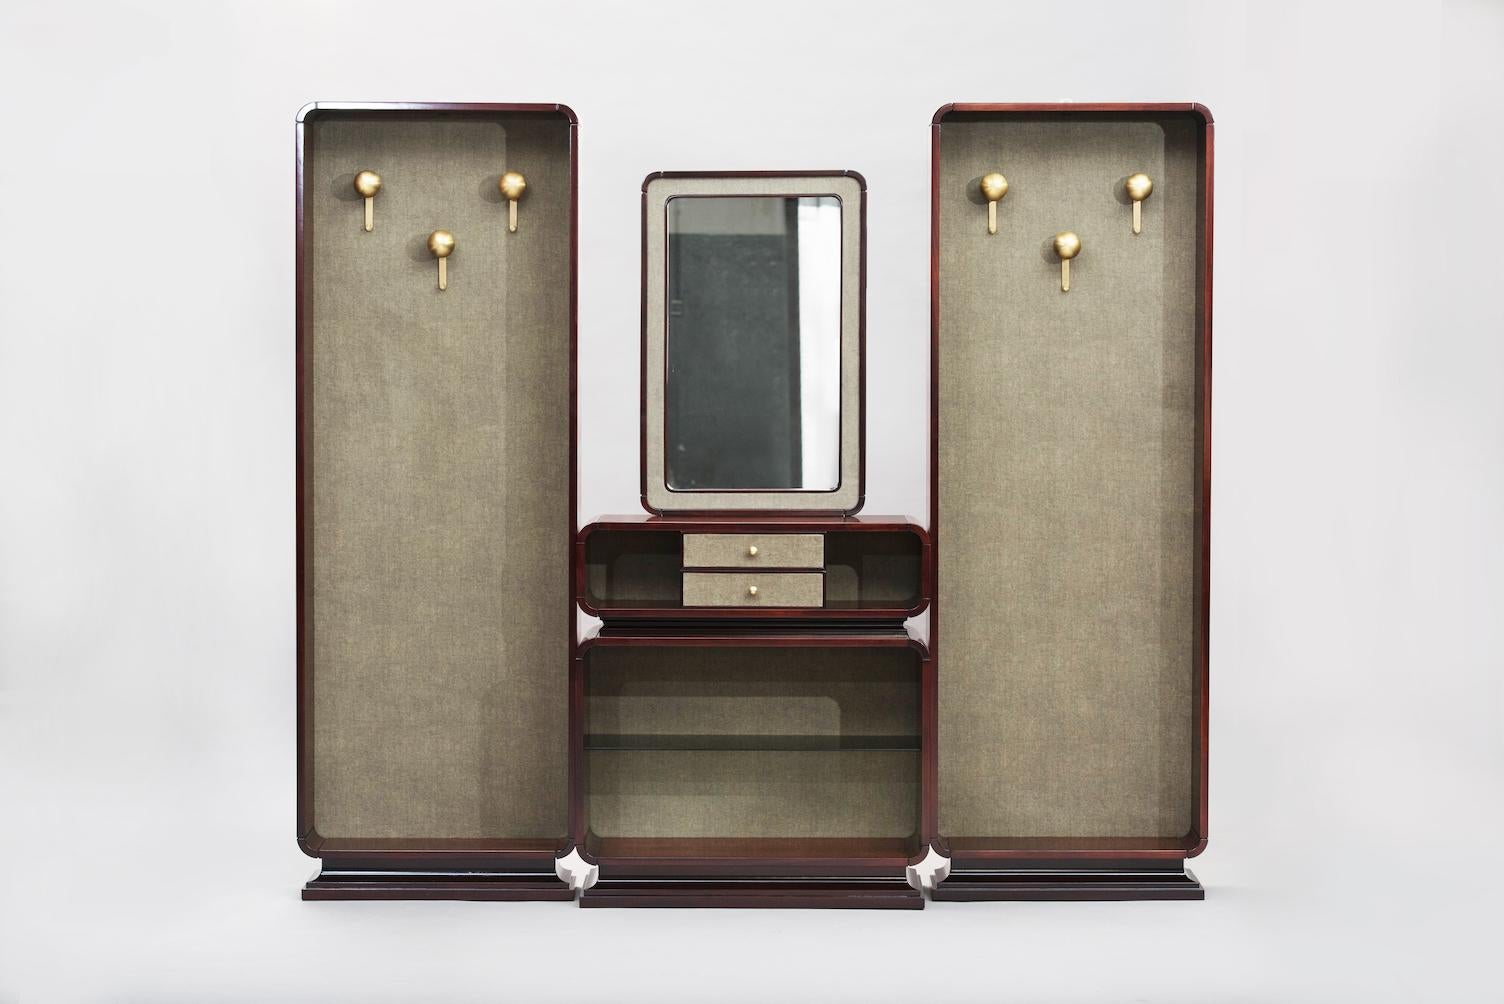 Italian rosewood Mid-Century Modern hall stand set, brass hardware and green fabric reupholstery.
Measures:
Coat racks H. 181 cm, W. 63 cm, D. 20 cm (each)
Cabinet H. 87 cm, W. 80 cm, D. 24/30 cm
Mirror H. 80 cm, W. 52 cm, D. 3,5 cm
Bench H. 42/48